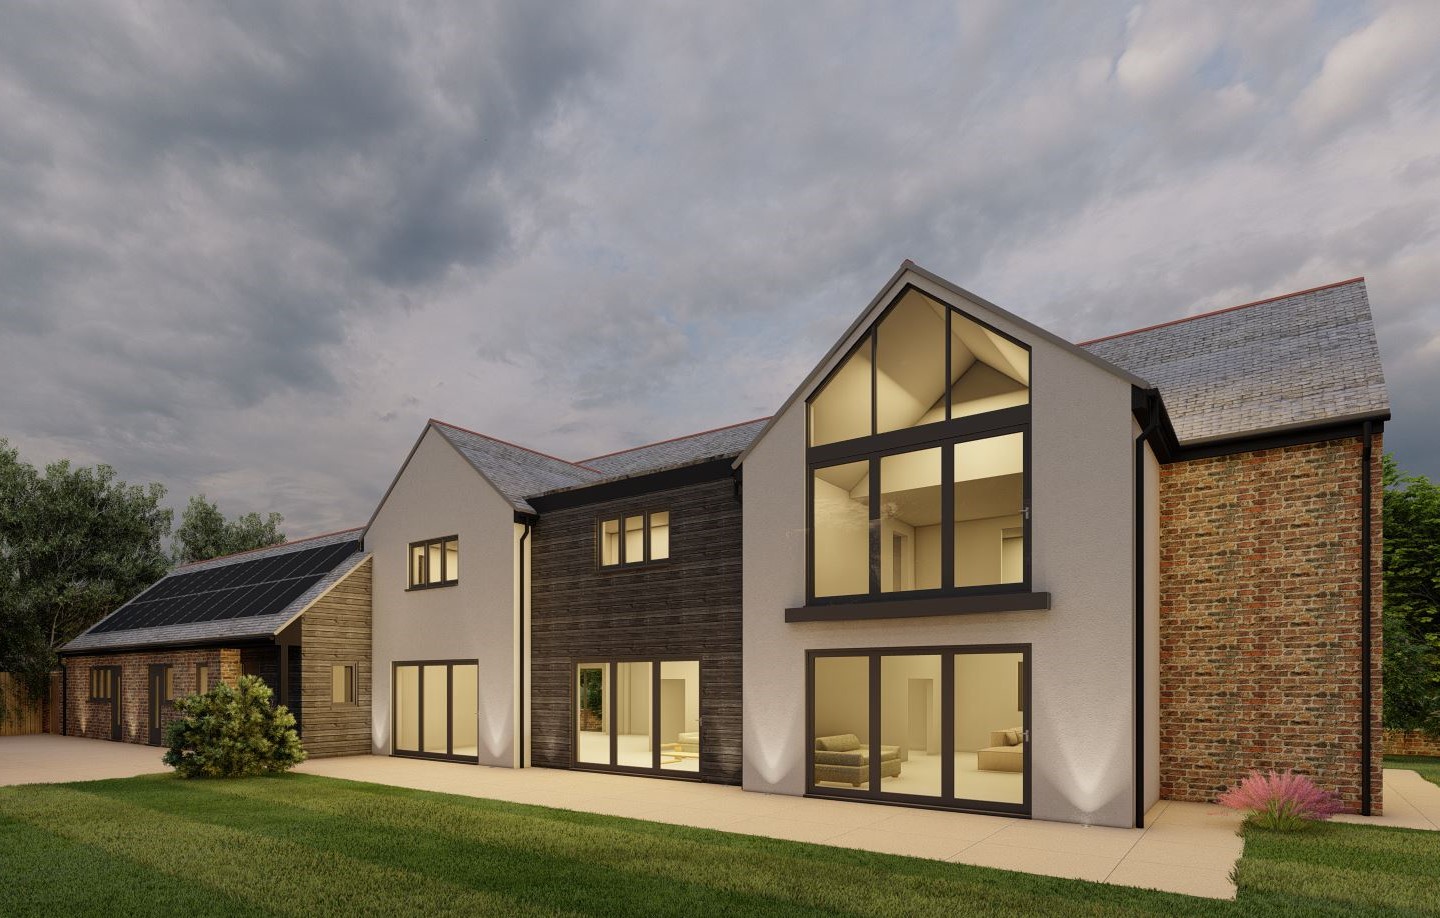 A pre-build image of a customer's stunning bespoke new build home. See the customer projects gallery for photos of this beautiful new home constructed by the Orchard Homes (Glos) Ltd team.